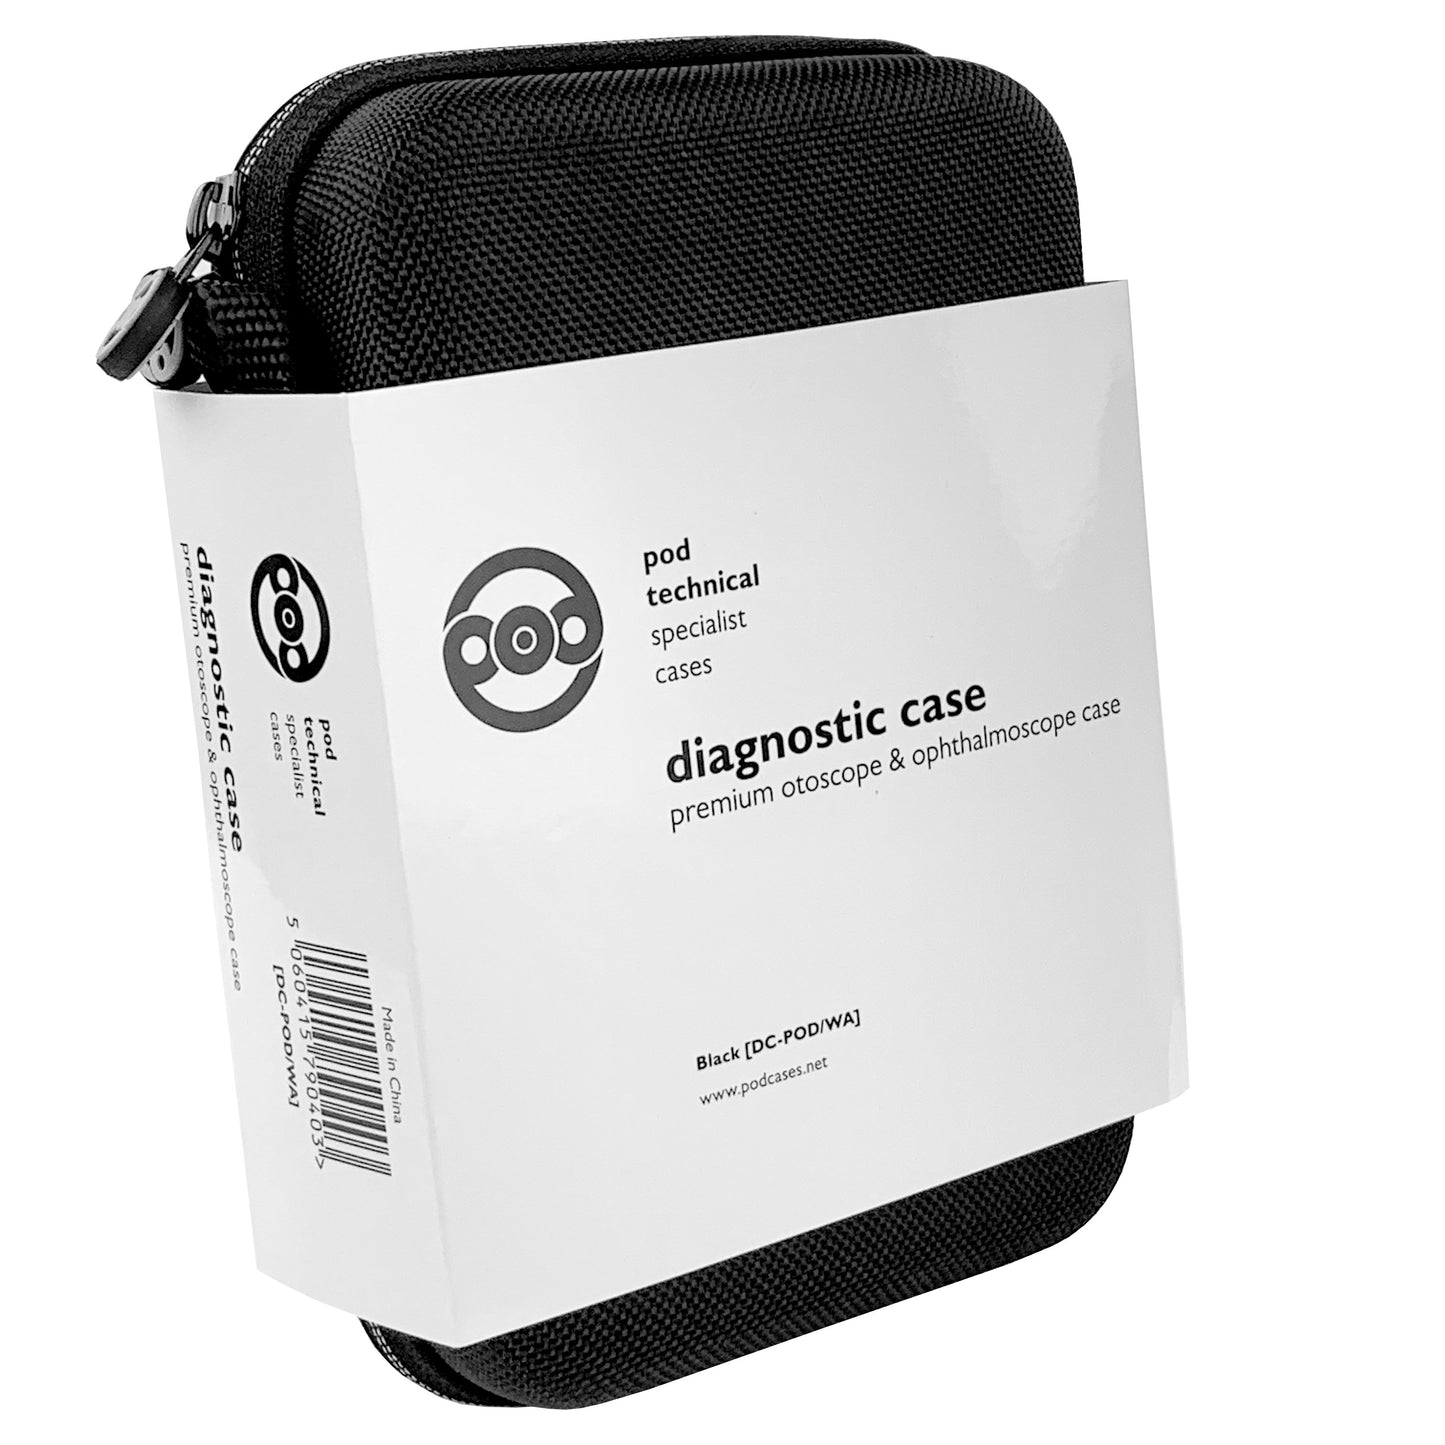 Premium Hard Carry Case for Welch Allyn Otoscope & Ophthalmoscope diagnostic sets